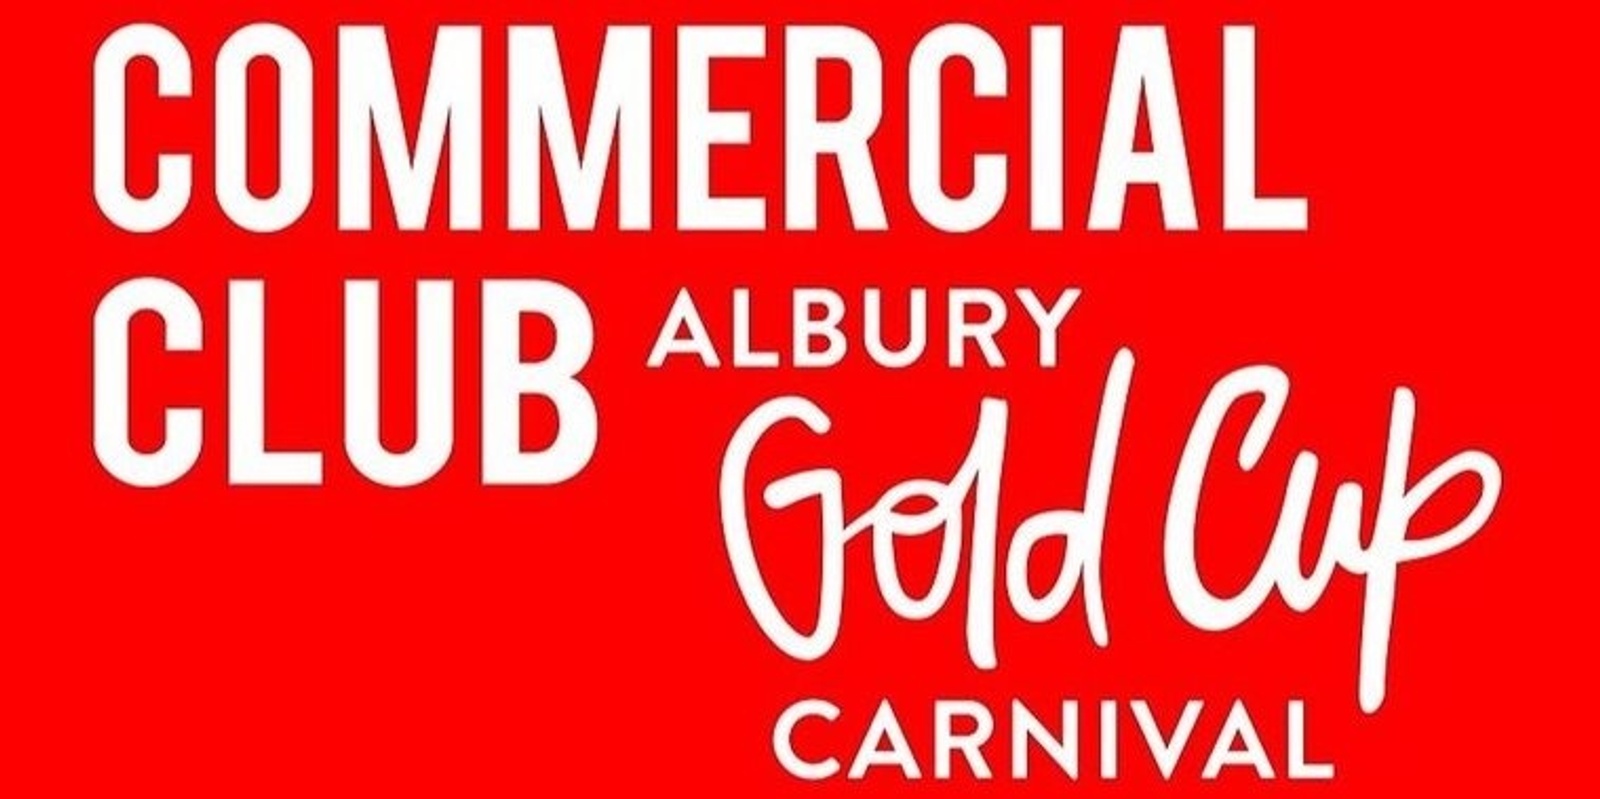 Banner image for Commercial Club Albury Gold Cup Day